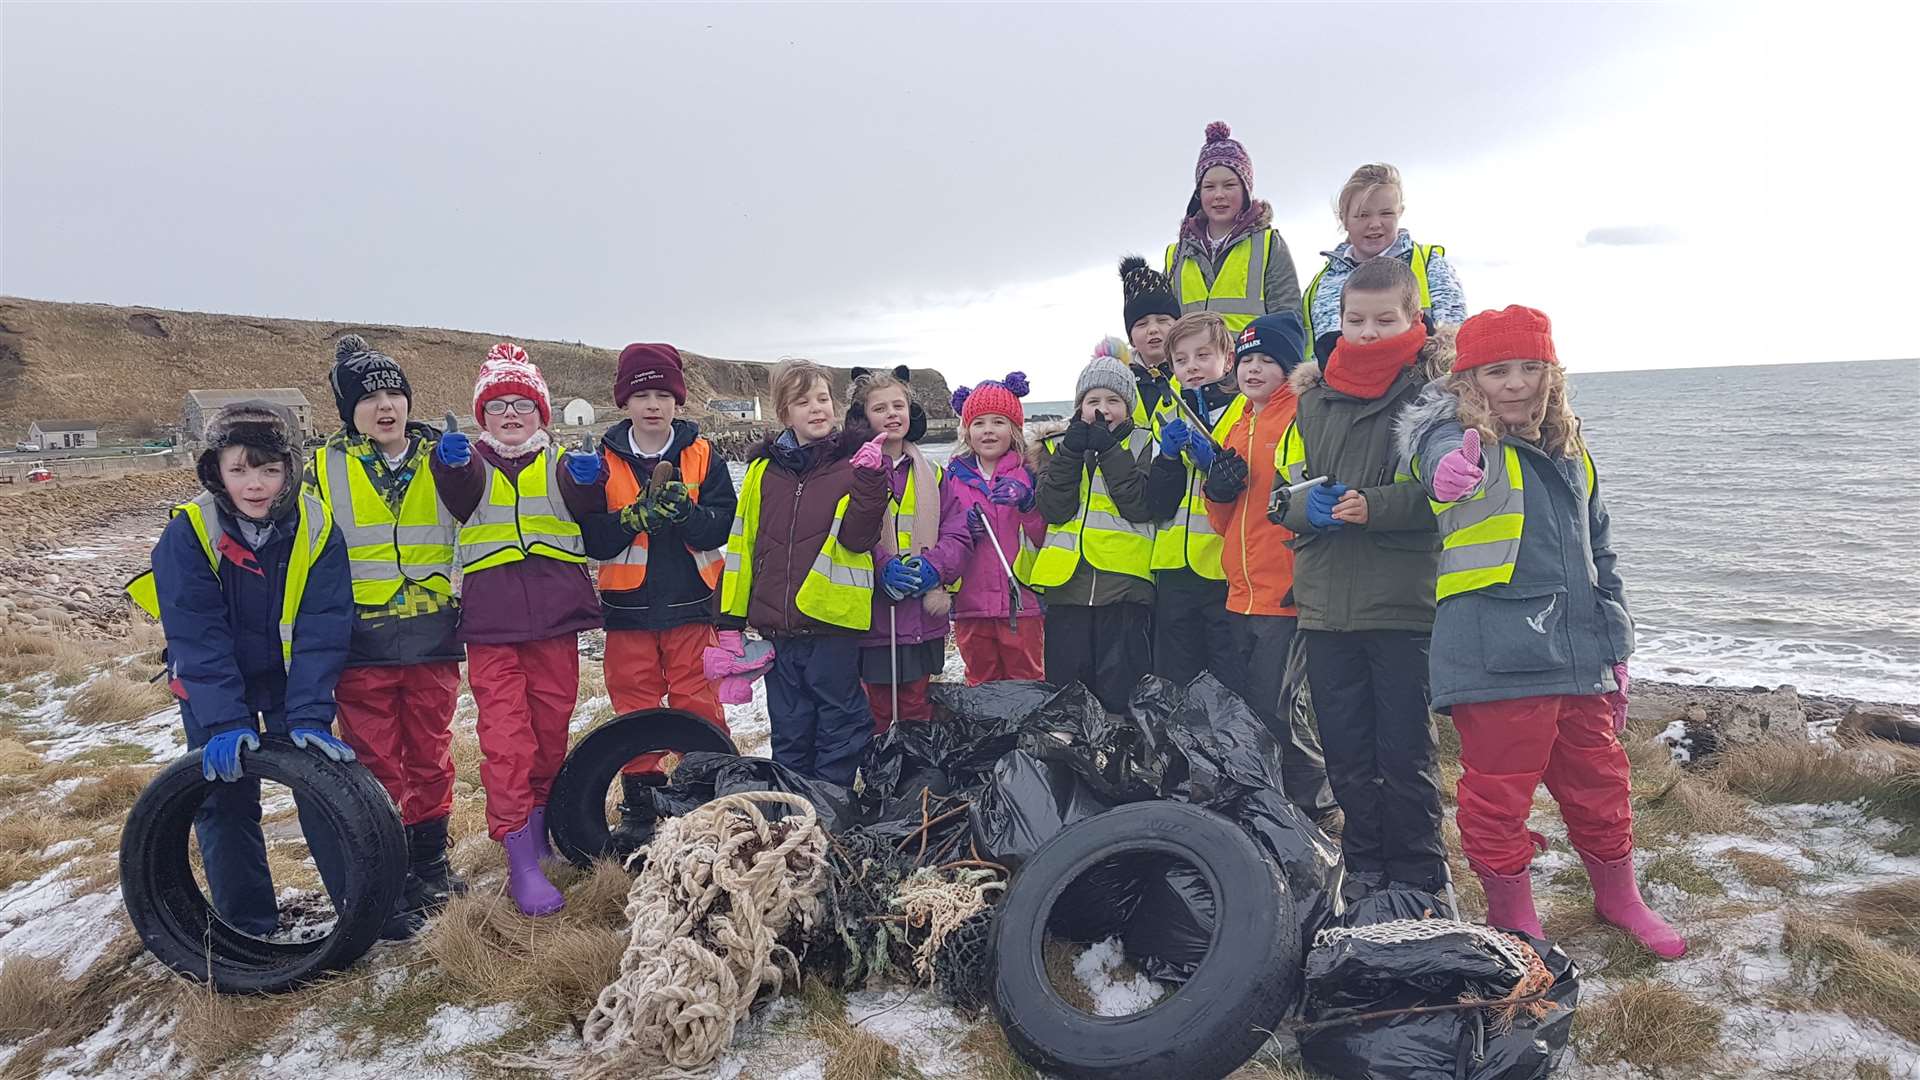 P4-6 pupils from Dunbeath Primary School who braved the elements in January 2019 to carry out a litter pick at the beach as part of the Keep Scotland Beautiful, Wrigley Litter Less Campaign.